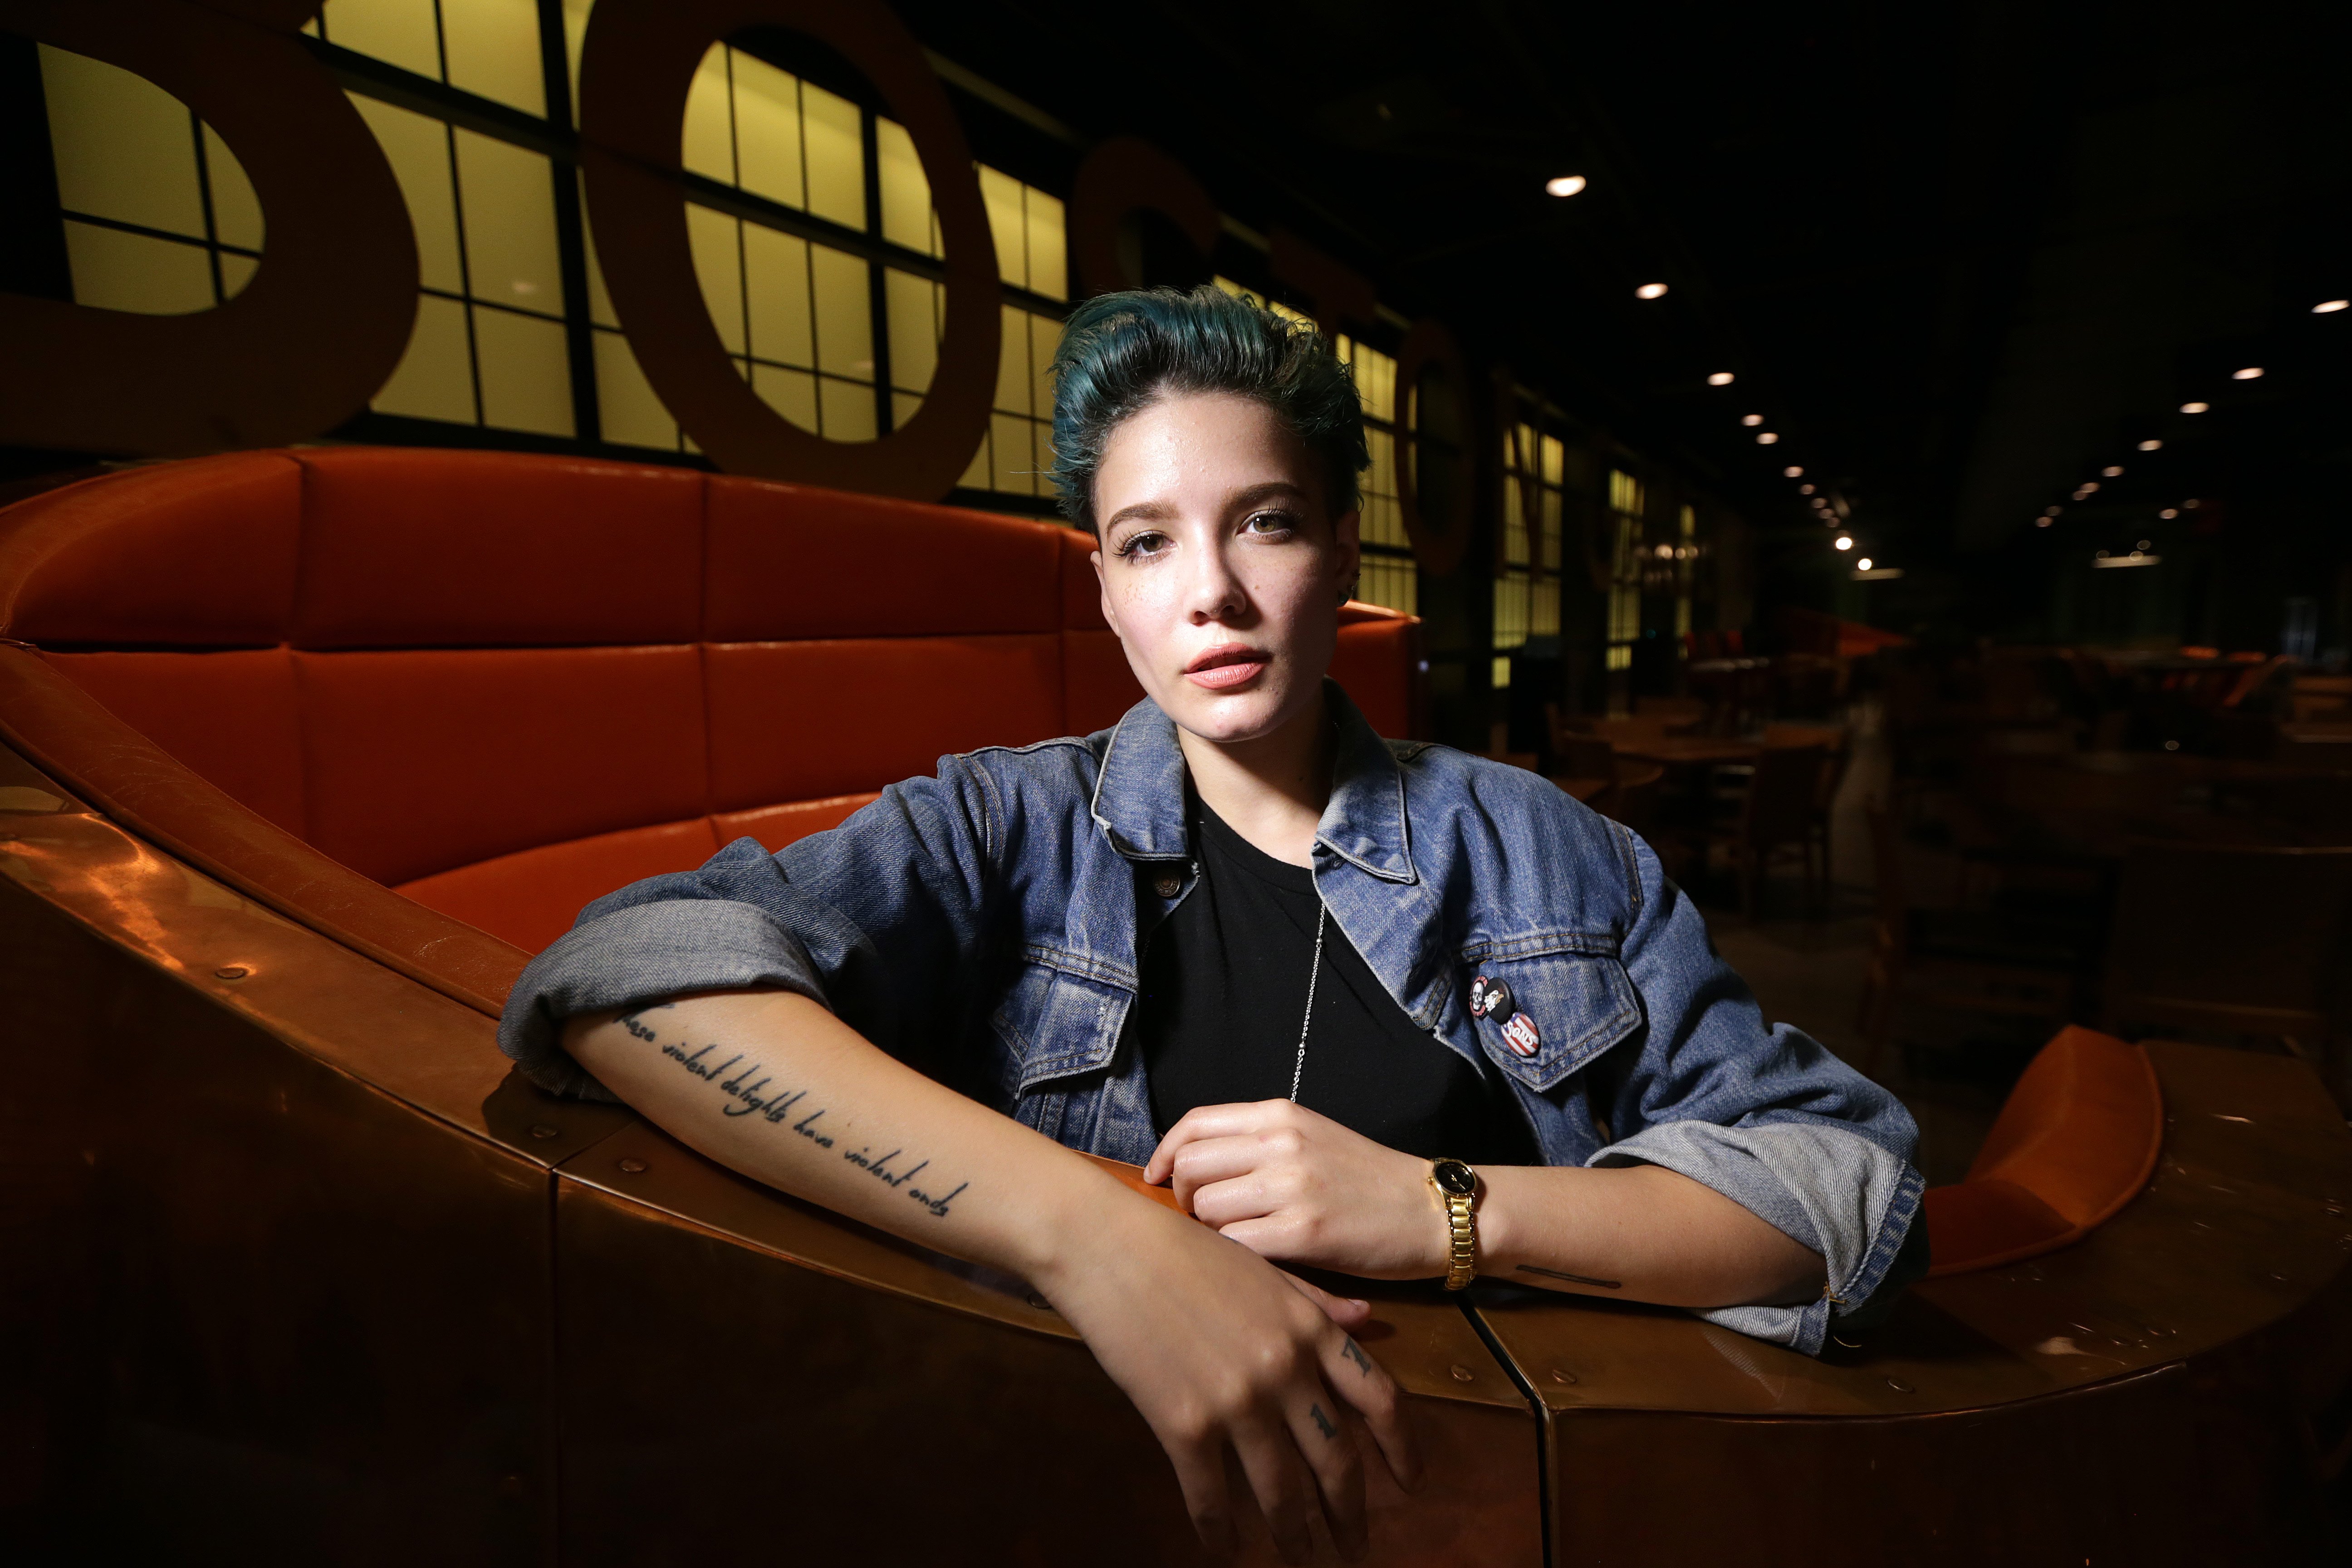 Pop singer Halsey (stage name of Ashley Frangipane) poses for a portrait in Boston on Jul. 1, 2015. | Source: Getty Images